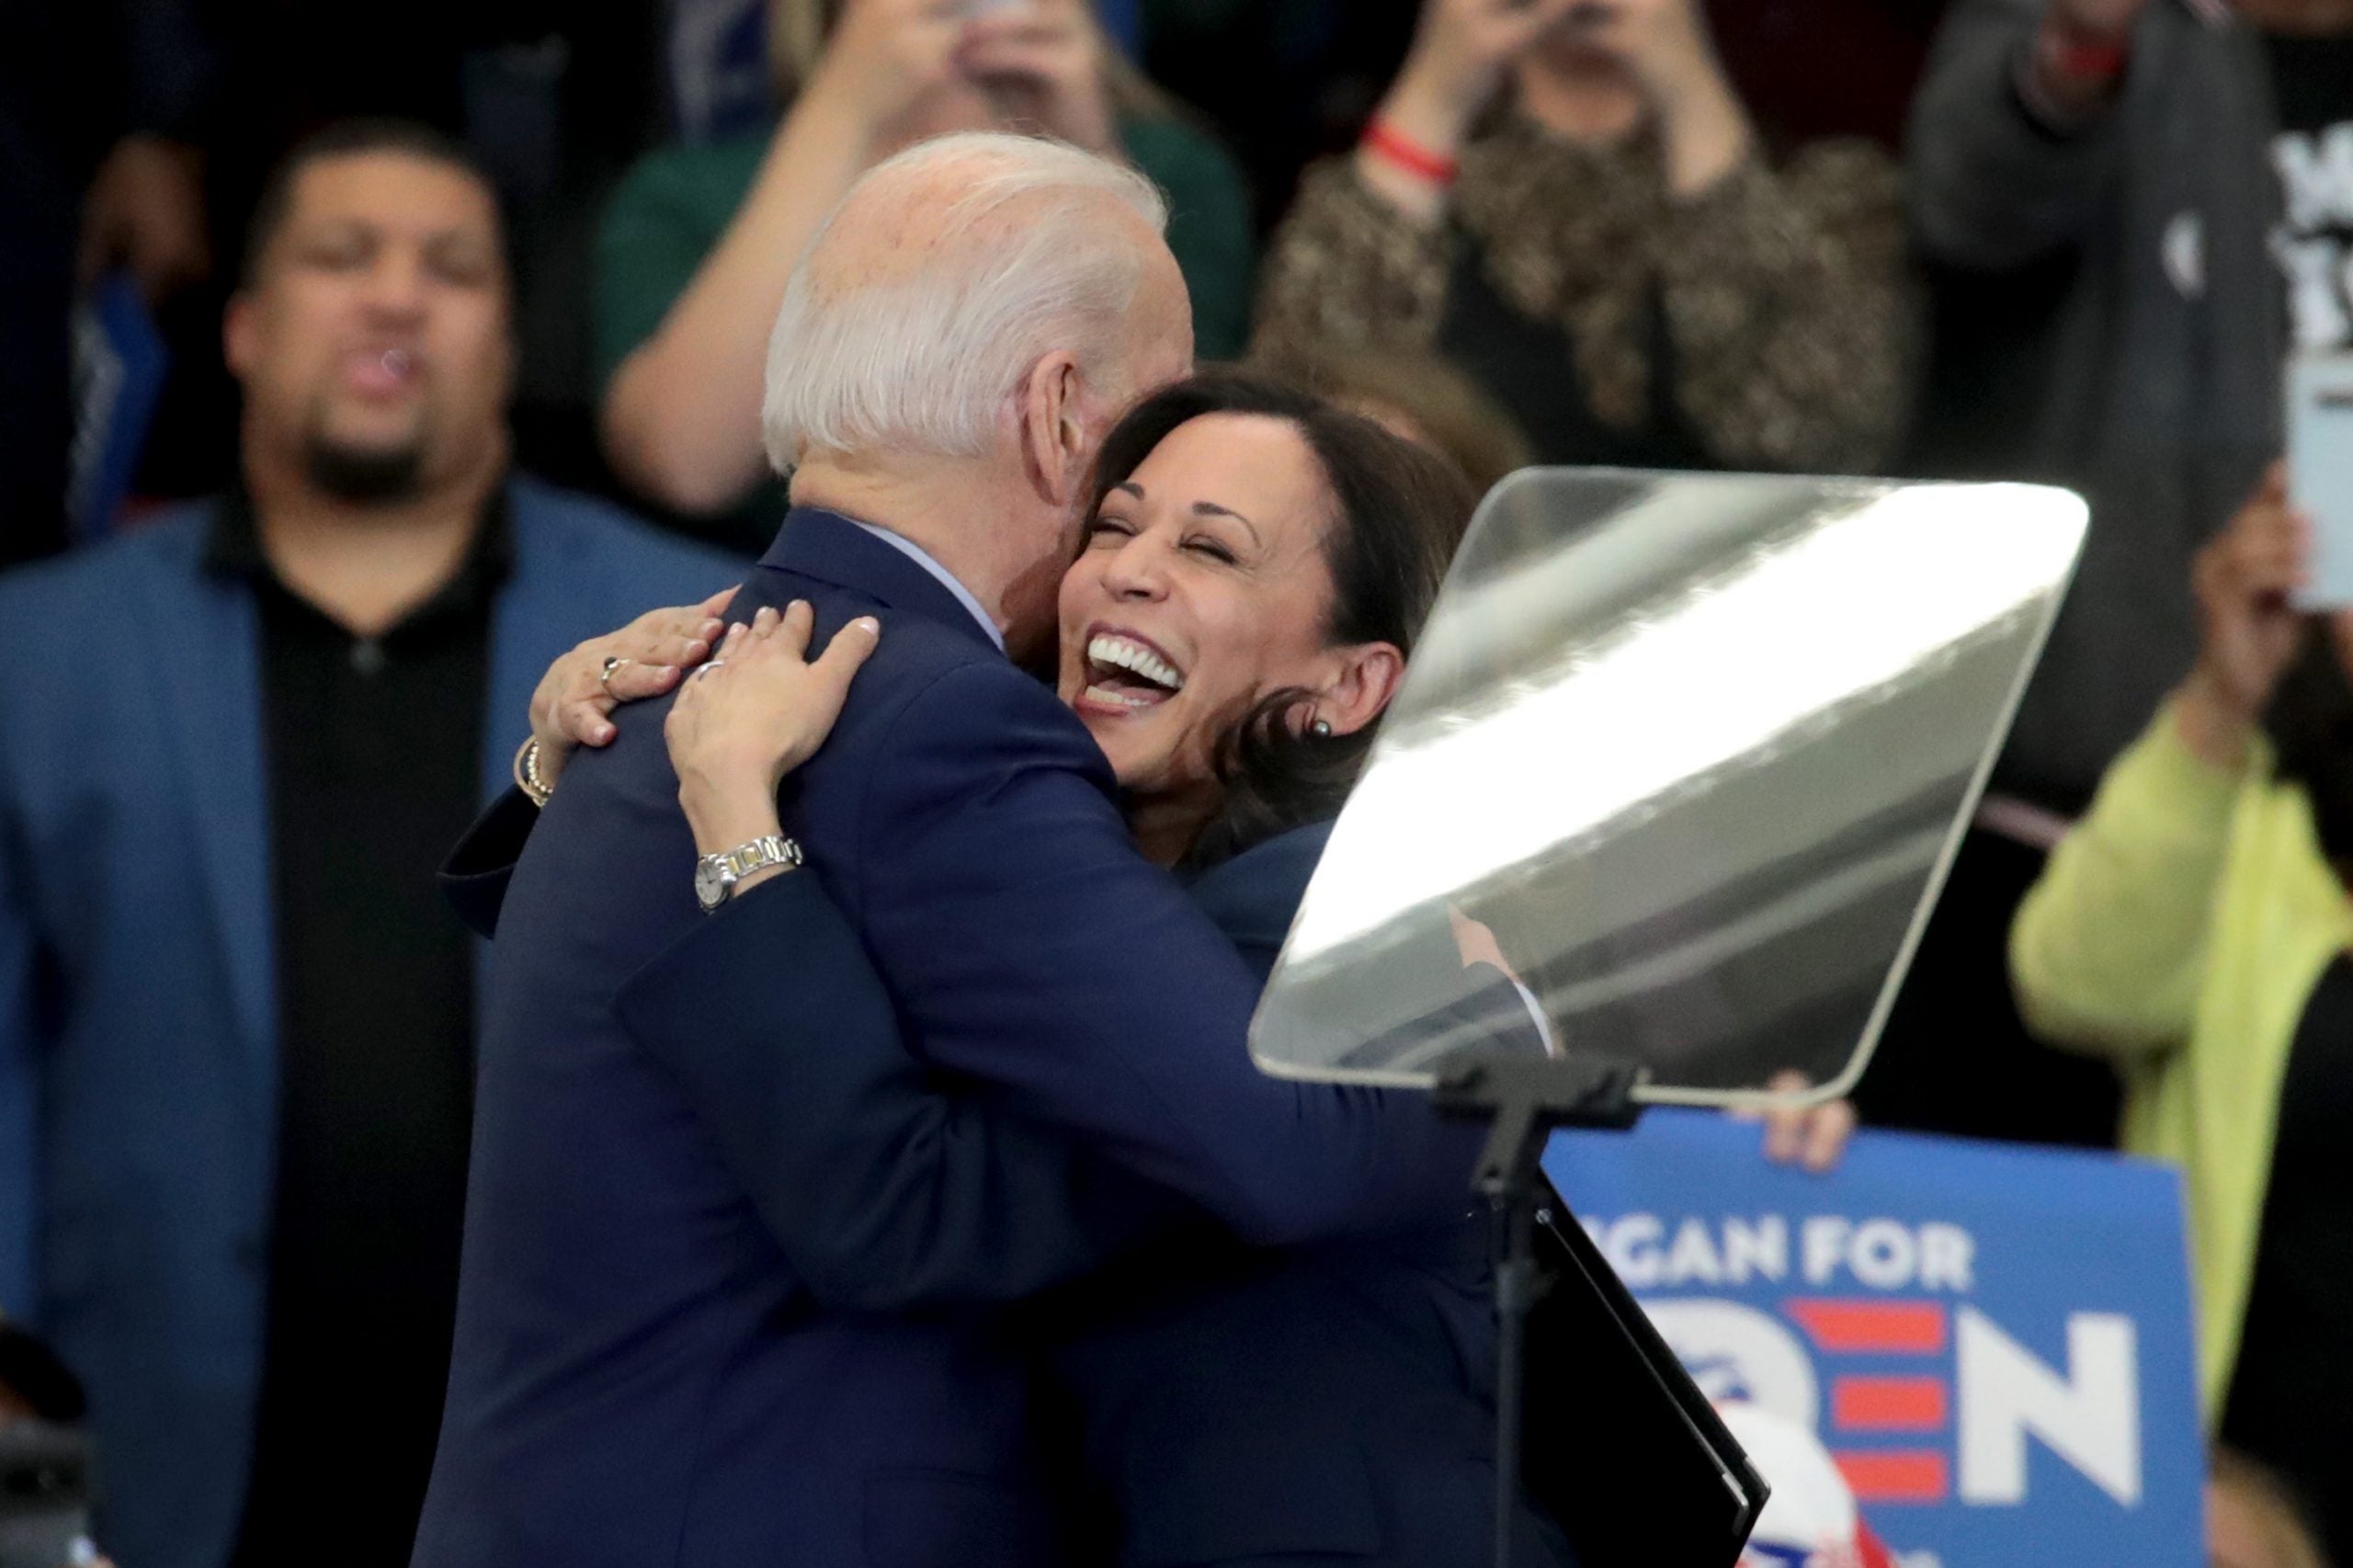 Opinion: Kamala Harris Shouldn't Have To Apologize For Being A Formidable Competitor